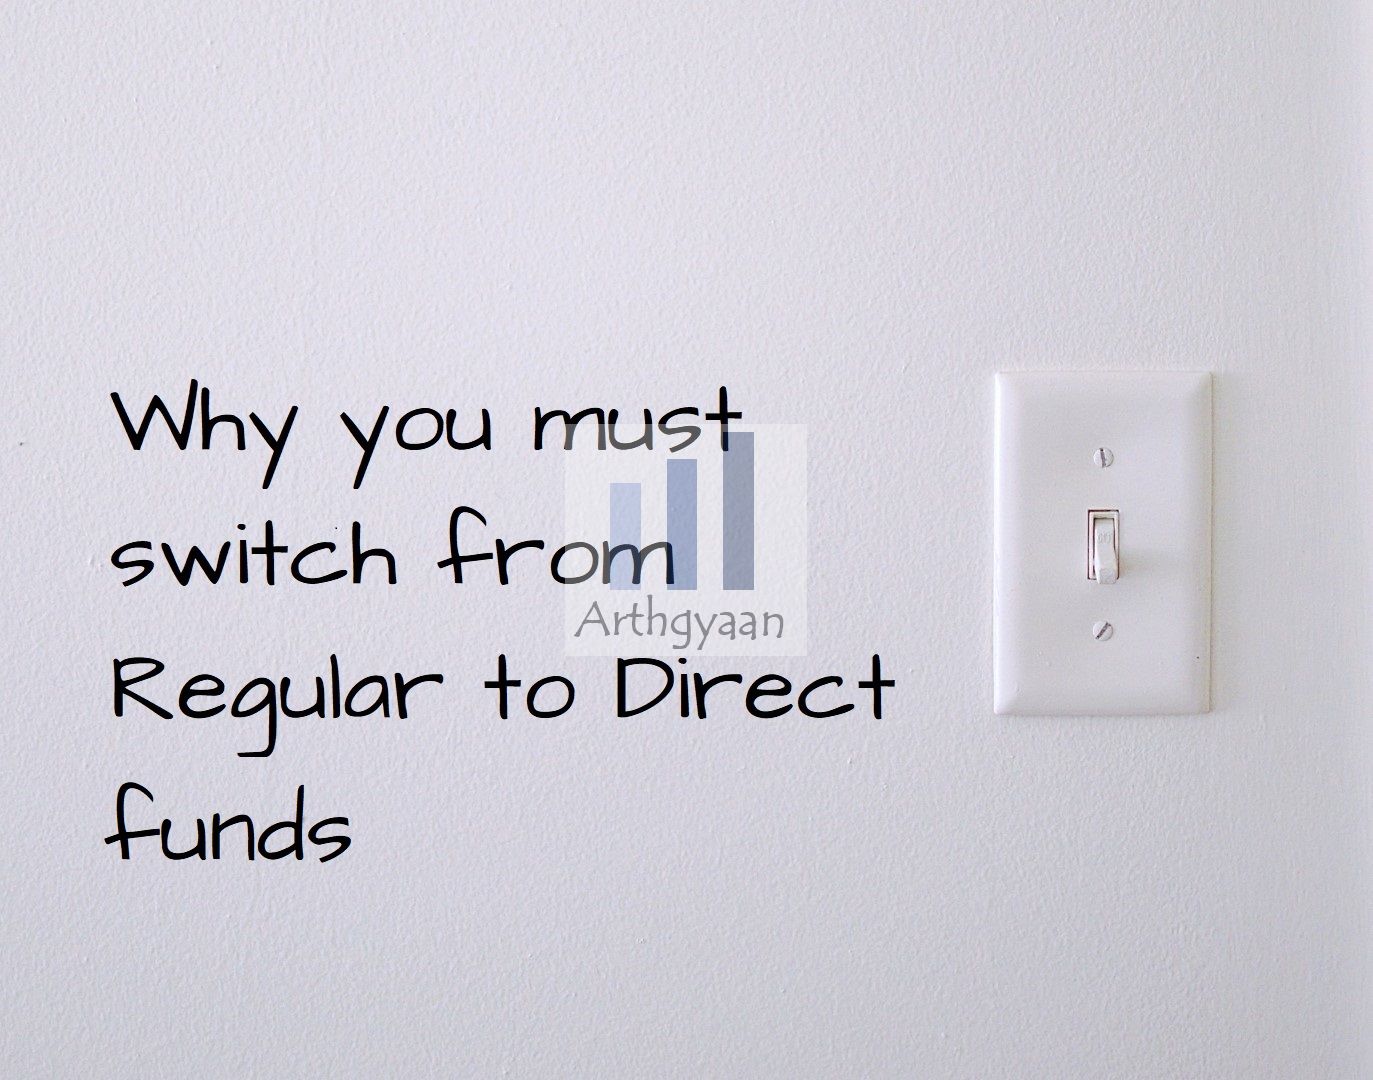 How to switch from regular to direct funds?